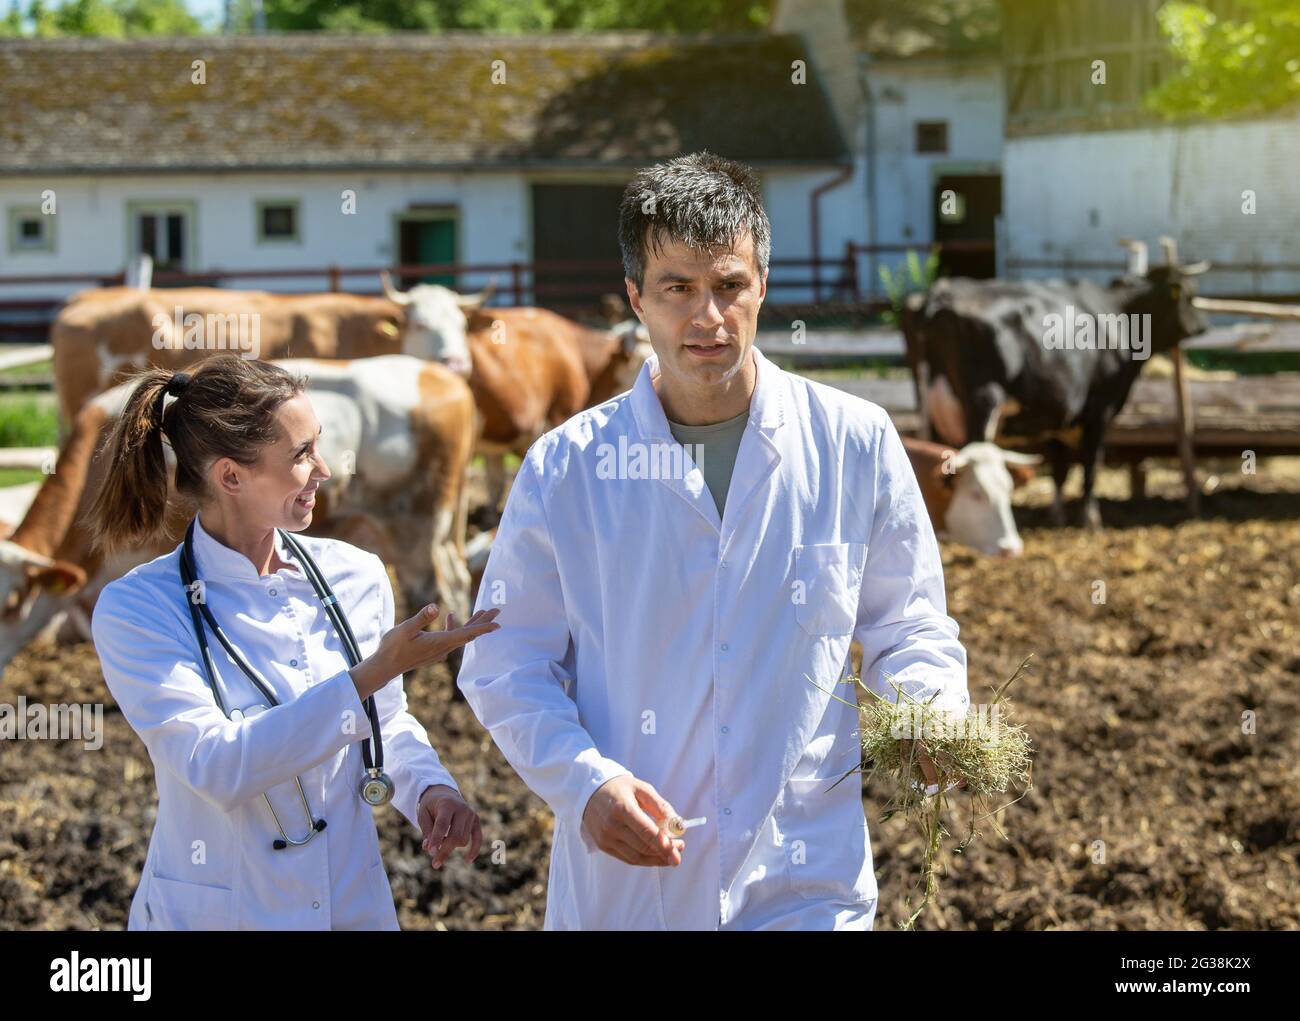 Male and female doctor walking on dairy farm with cows in background. Two veterinarians talking about medicine examinations of cattle. Stock Photo